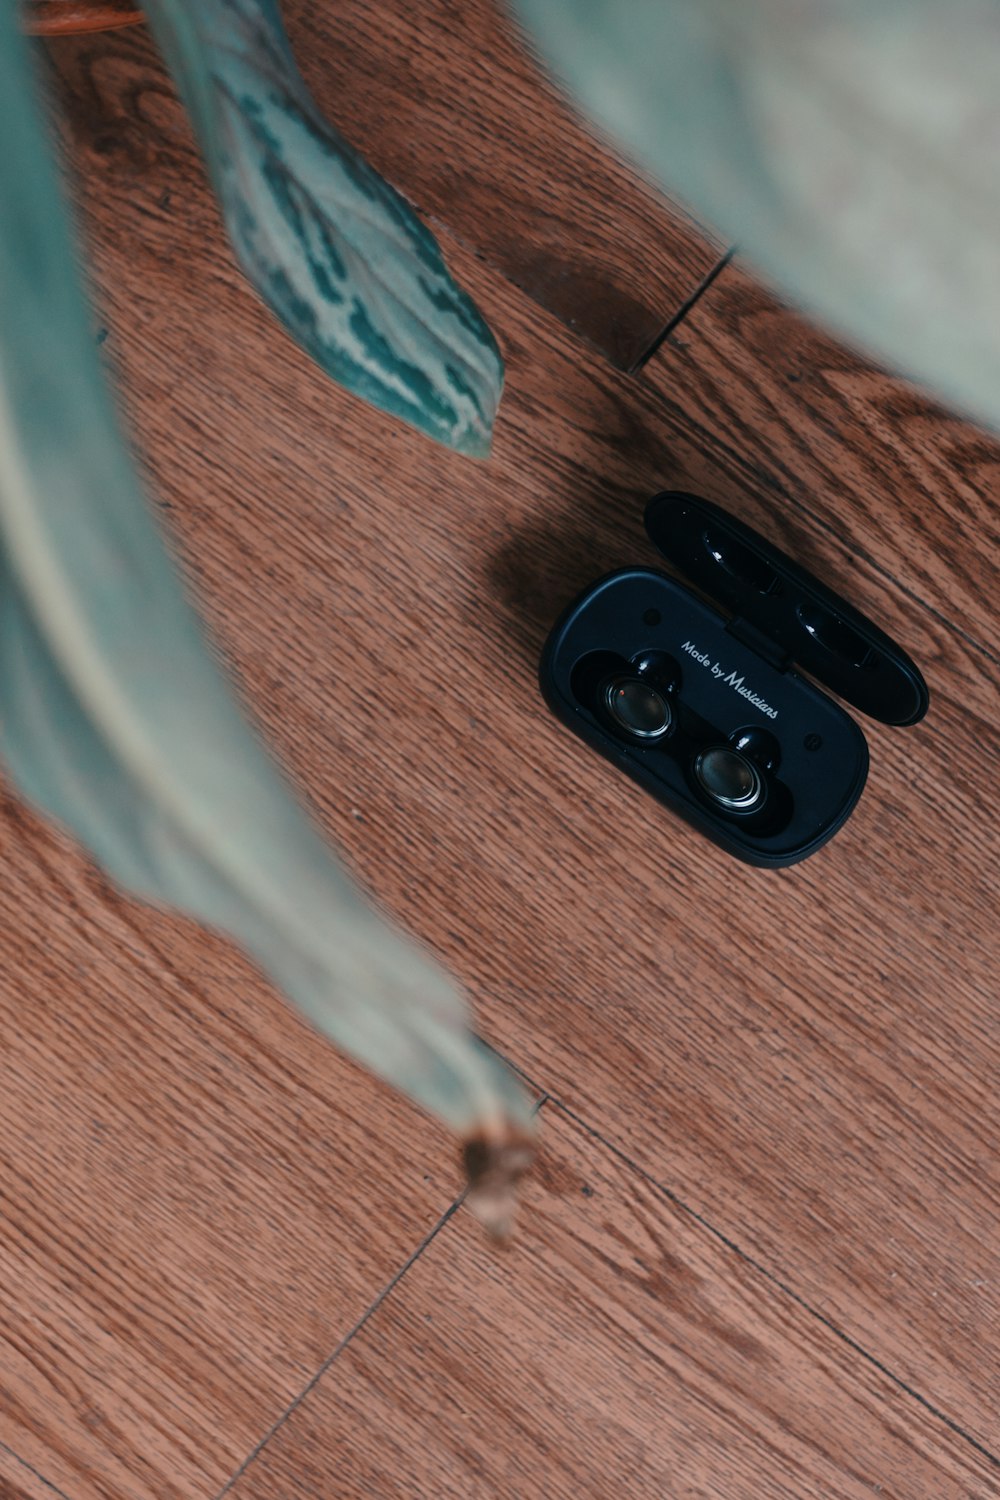 a close up of a cell phone on a wooden floor